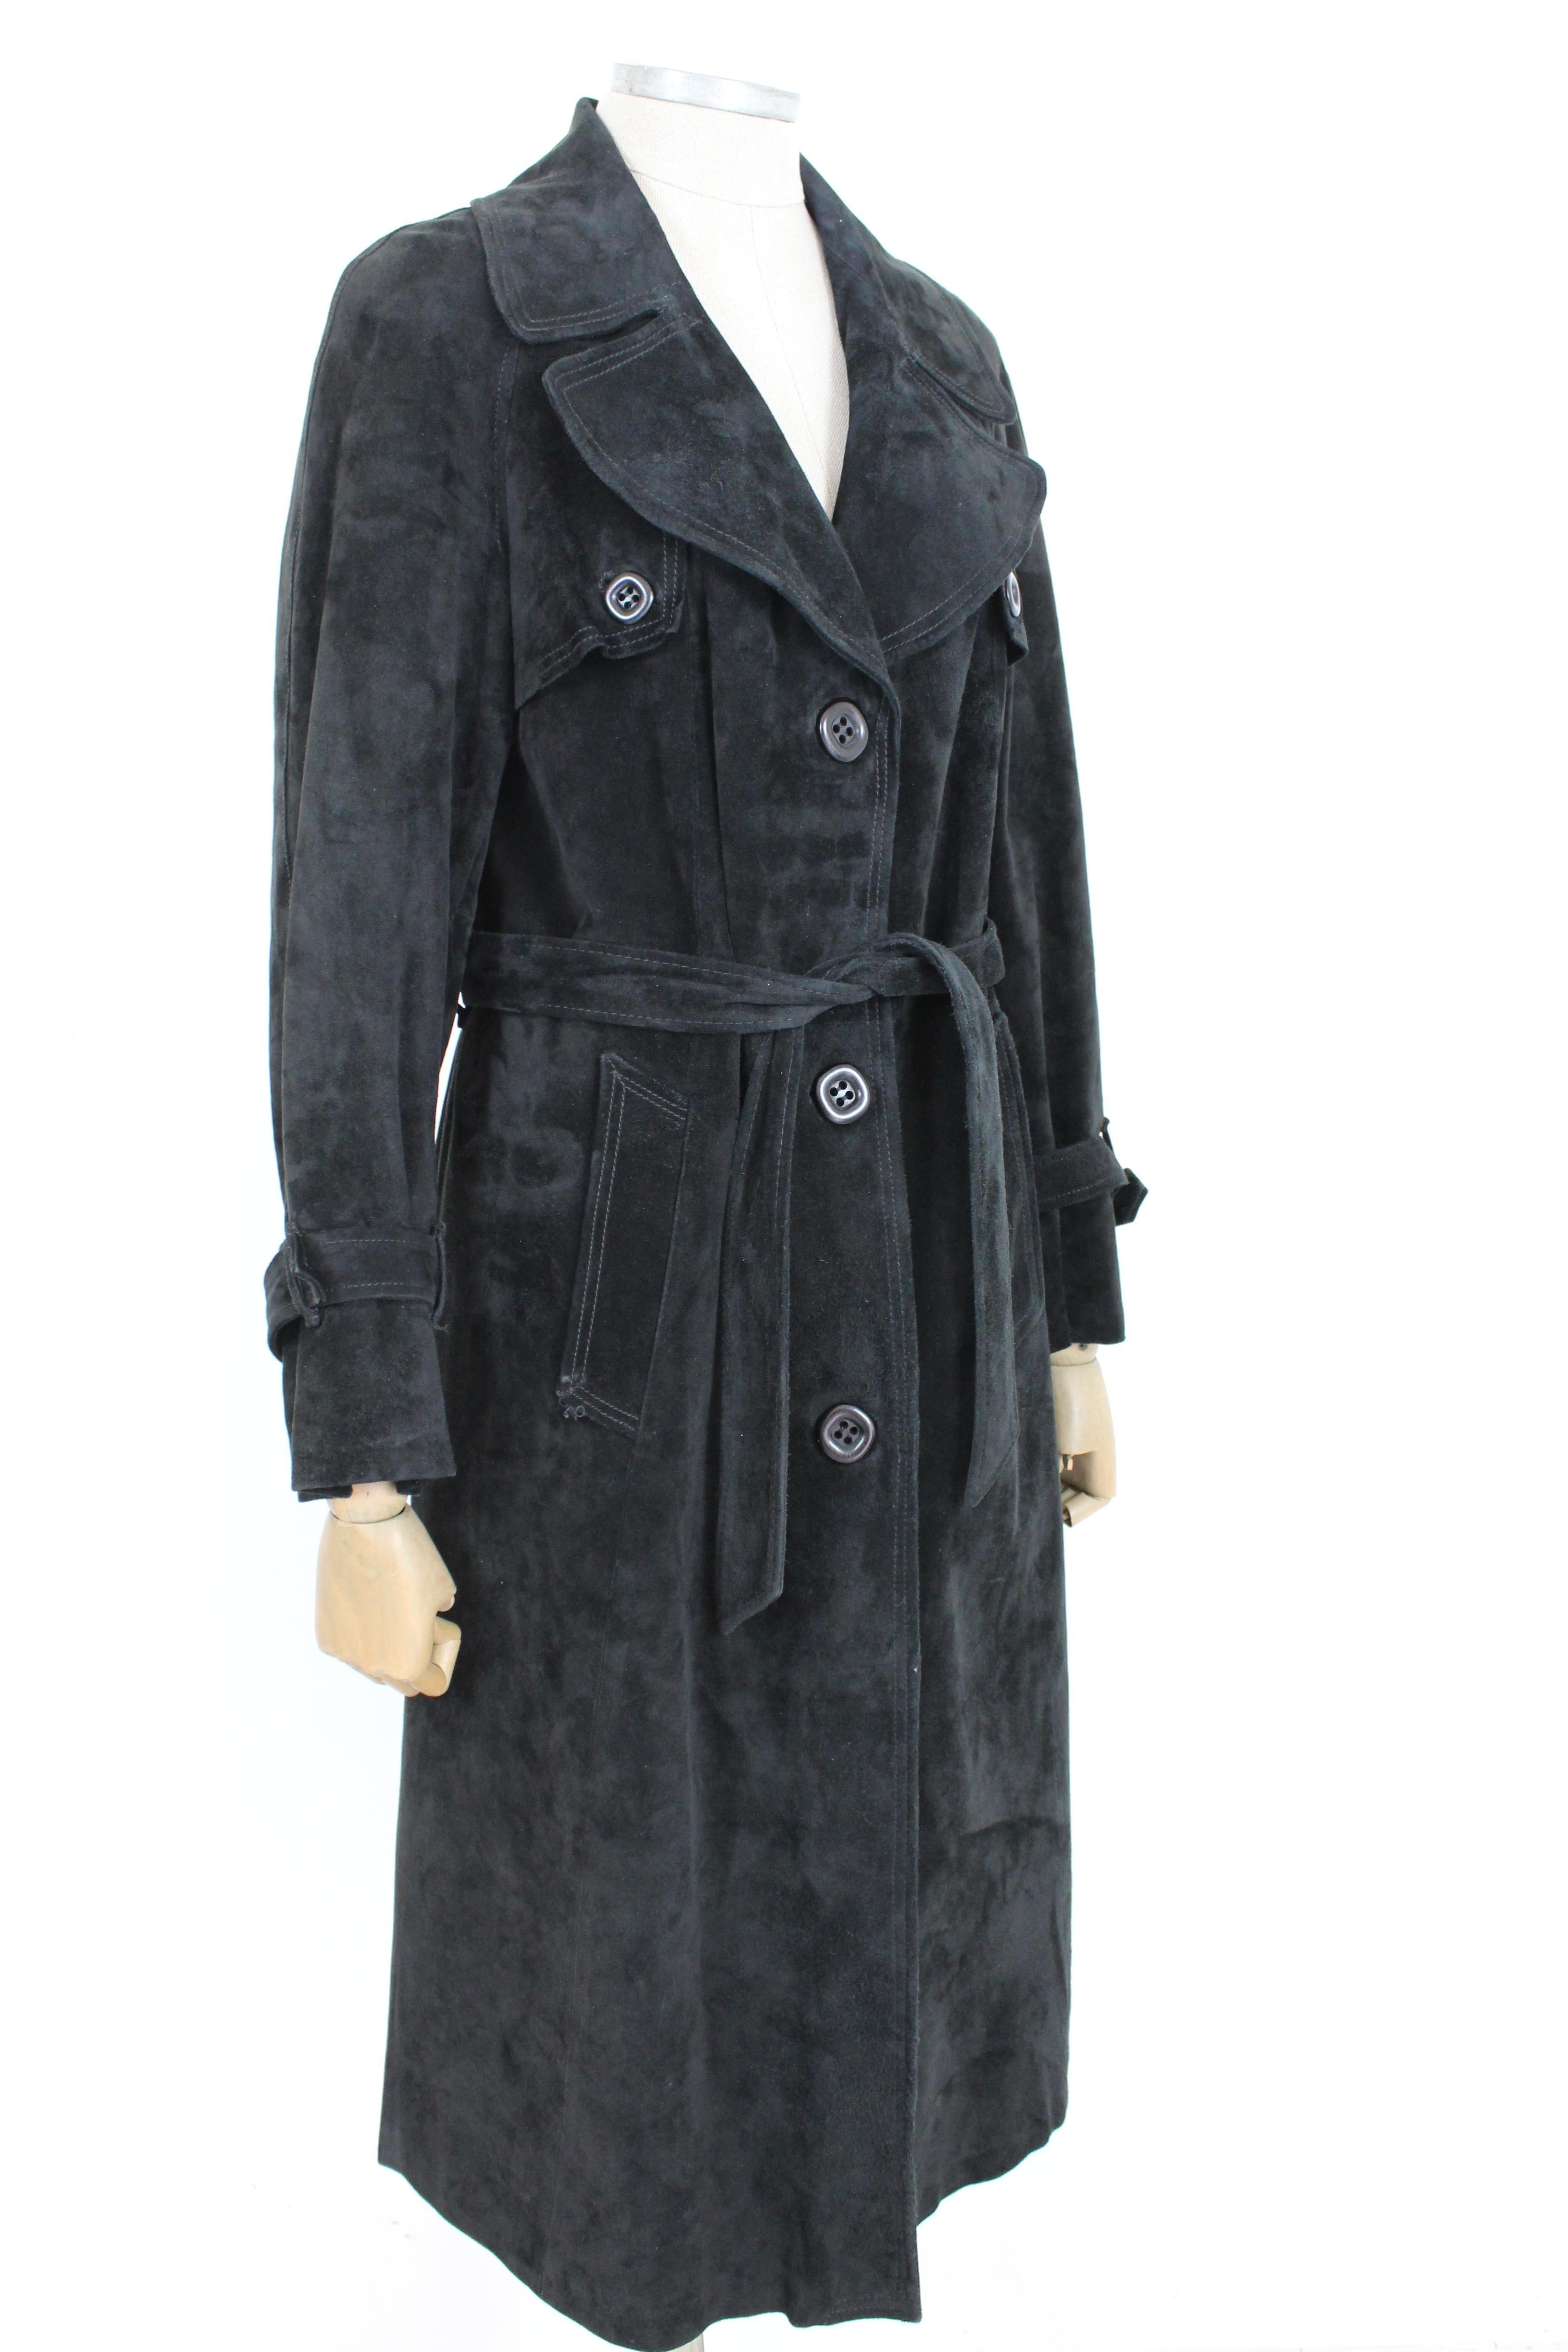 Women's Suede Leather Black Vintage Trench Coat